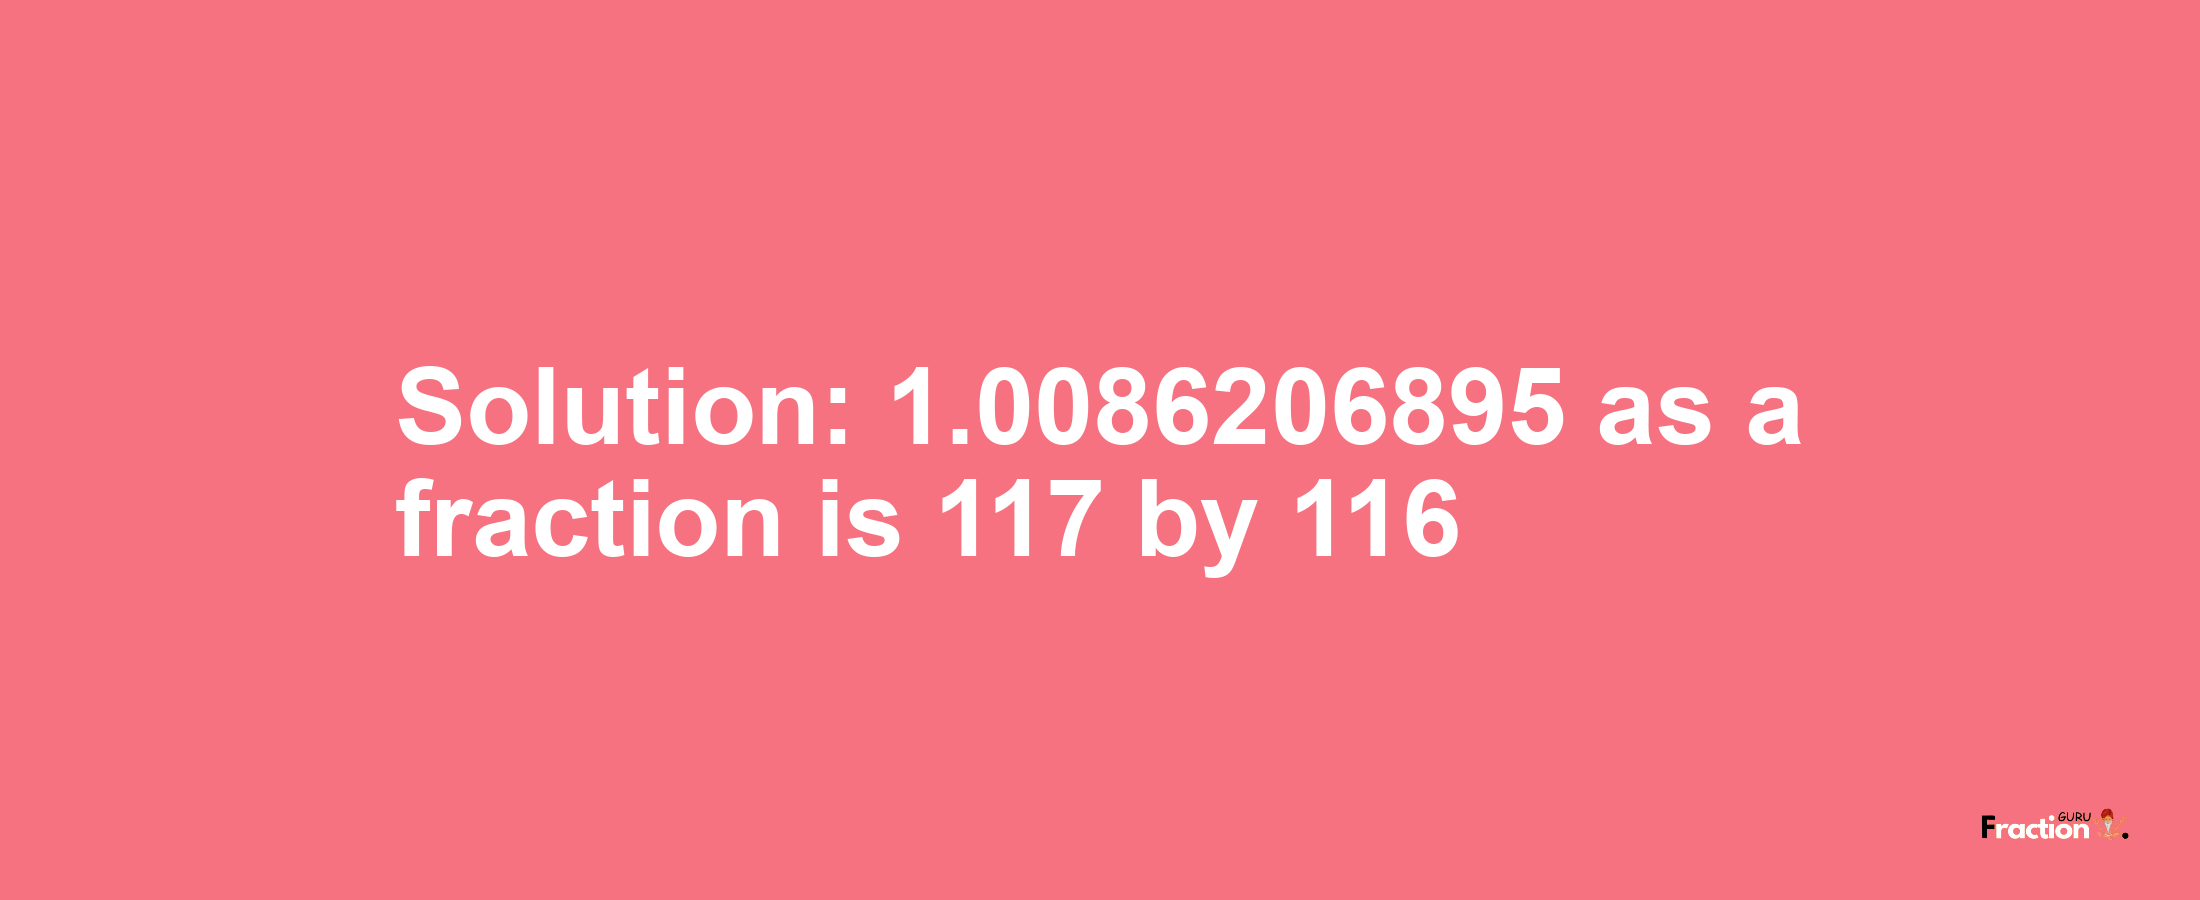 Solution:1.0086206895 as a fraction is 117/116